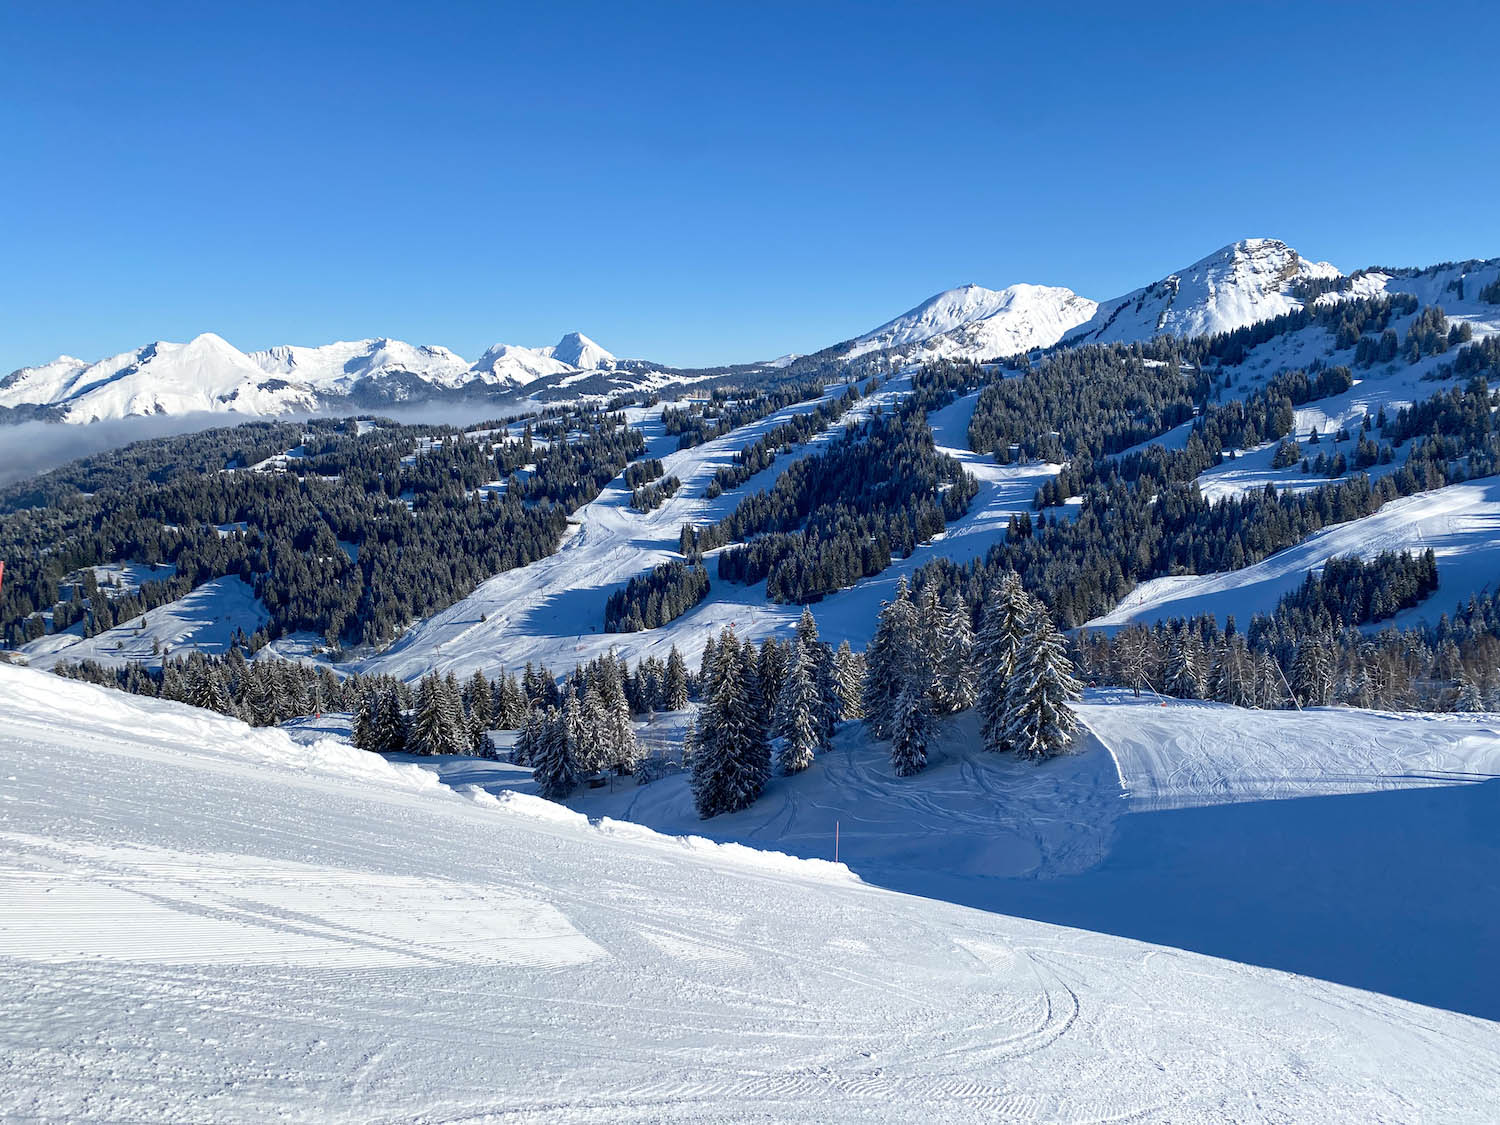 Pistes in Les Gets